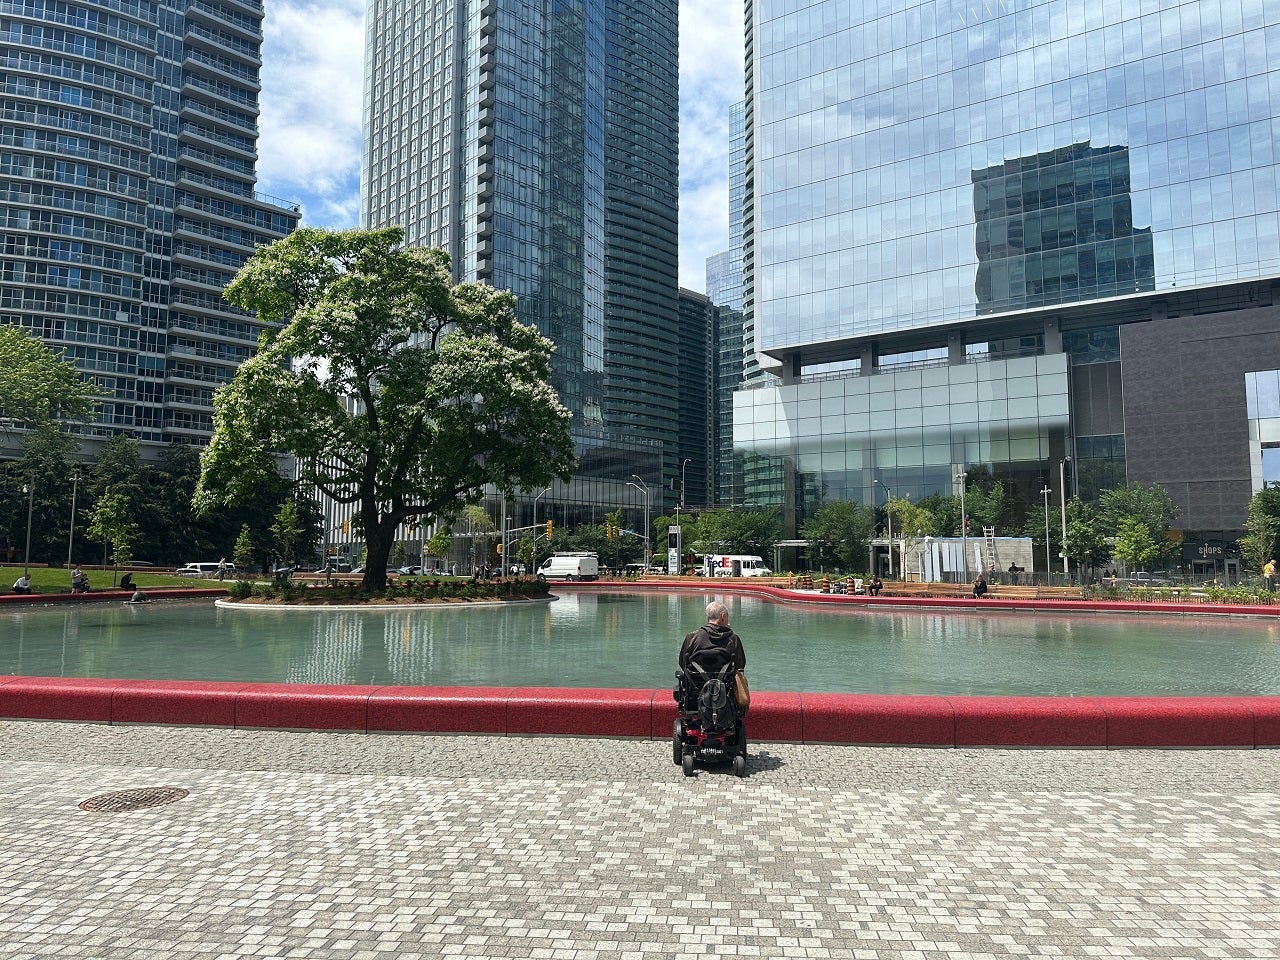 person in a wheelchair next to a red tiled pond